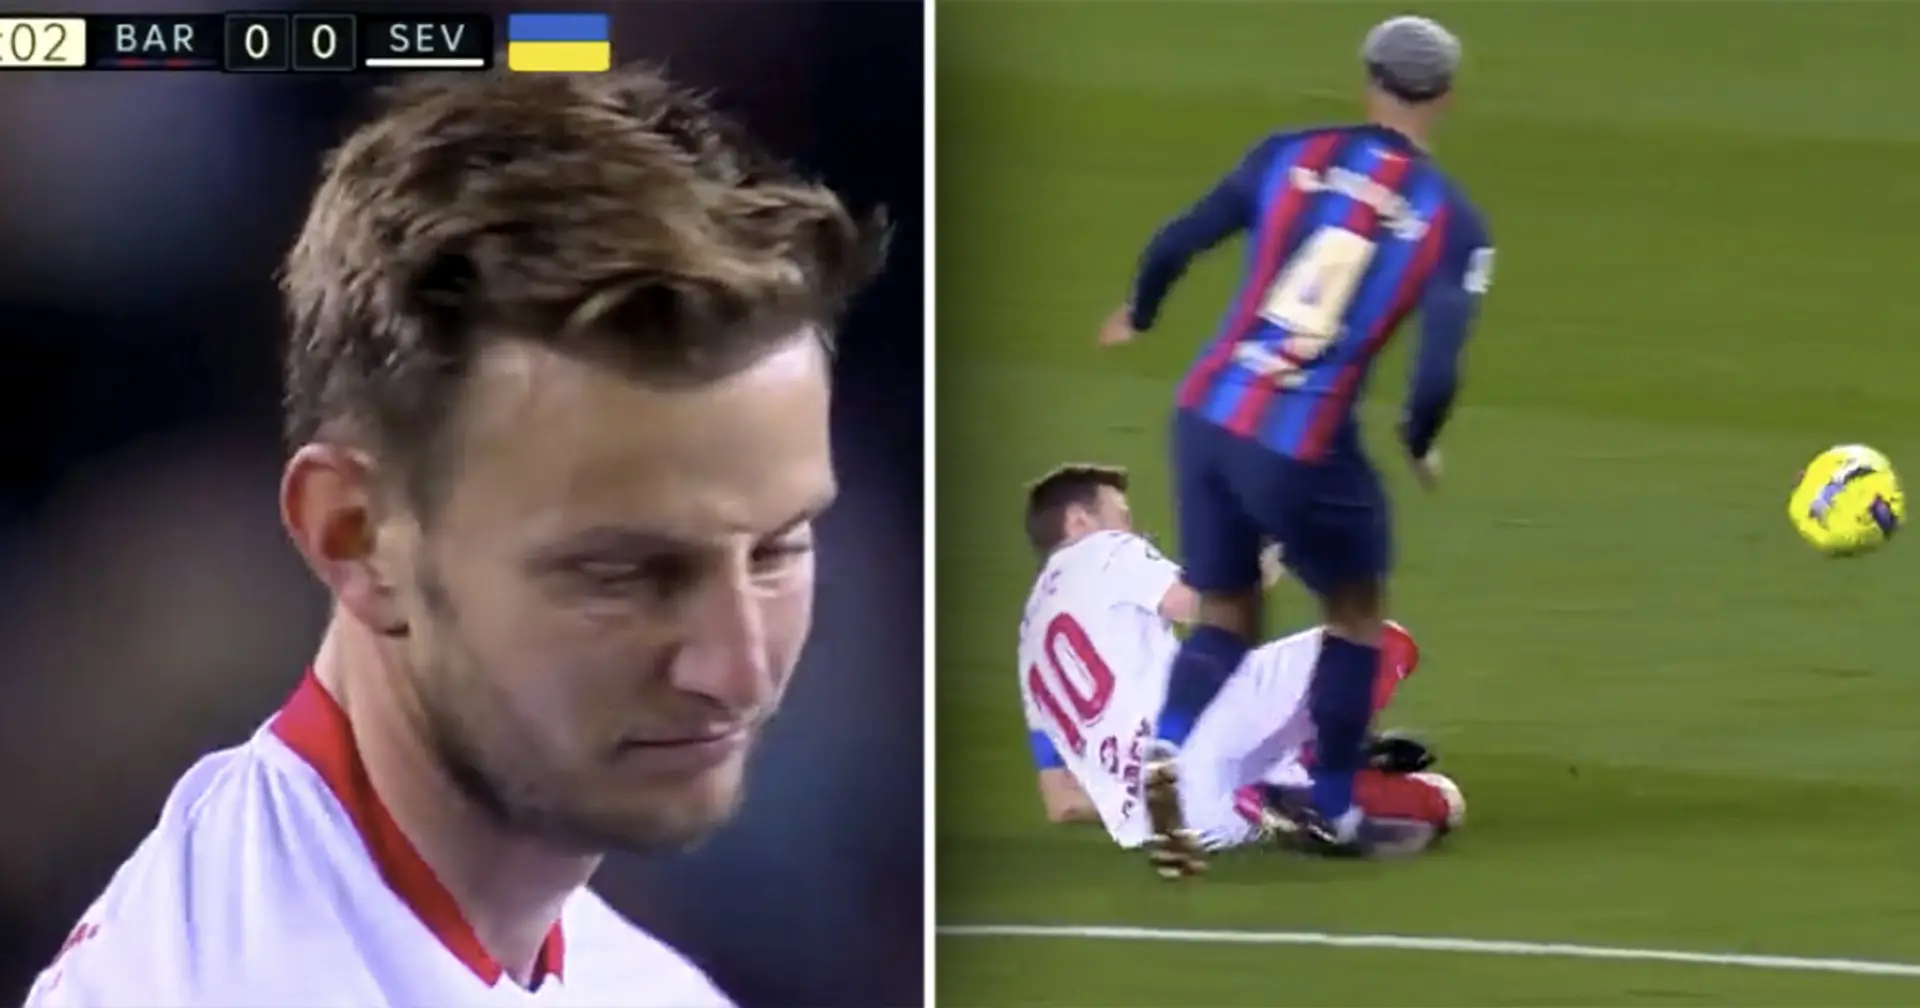 Rakitic brings Araujo down with harsh foul, his reaction spotted